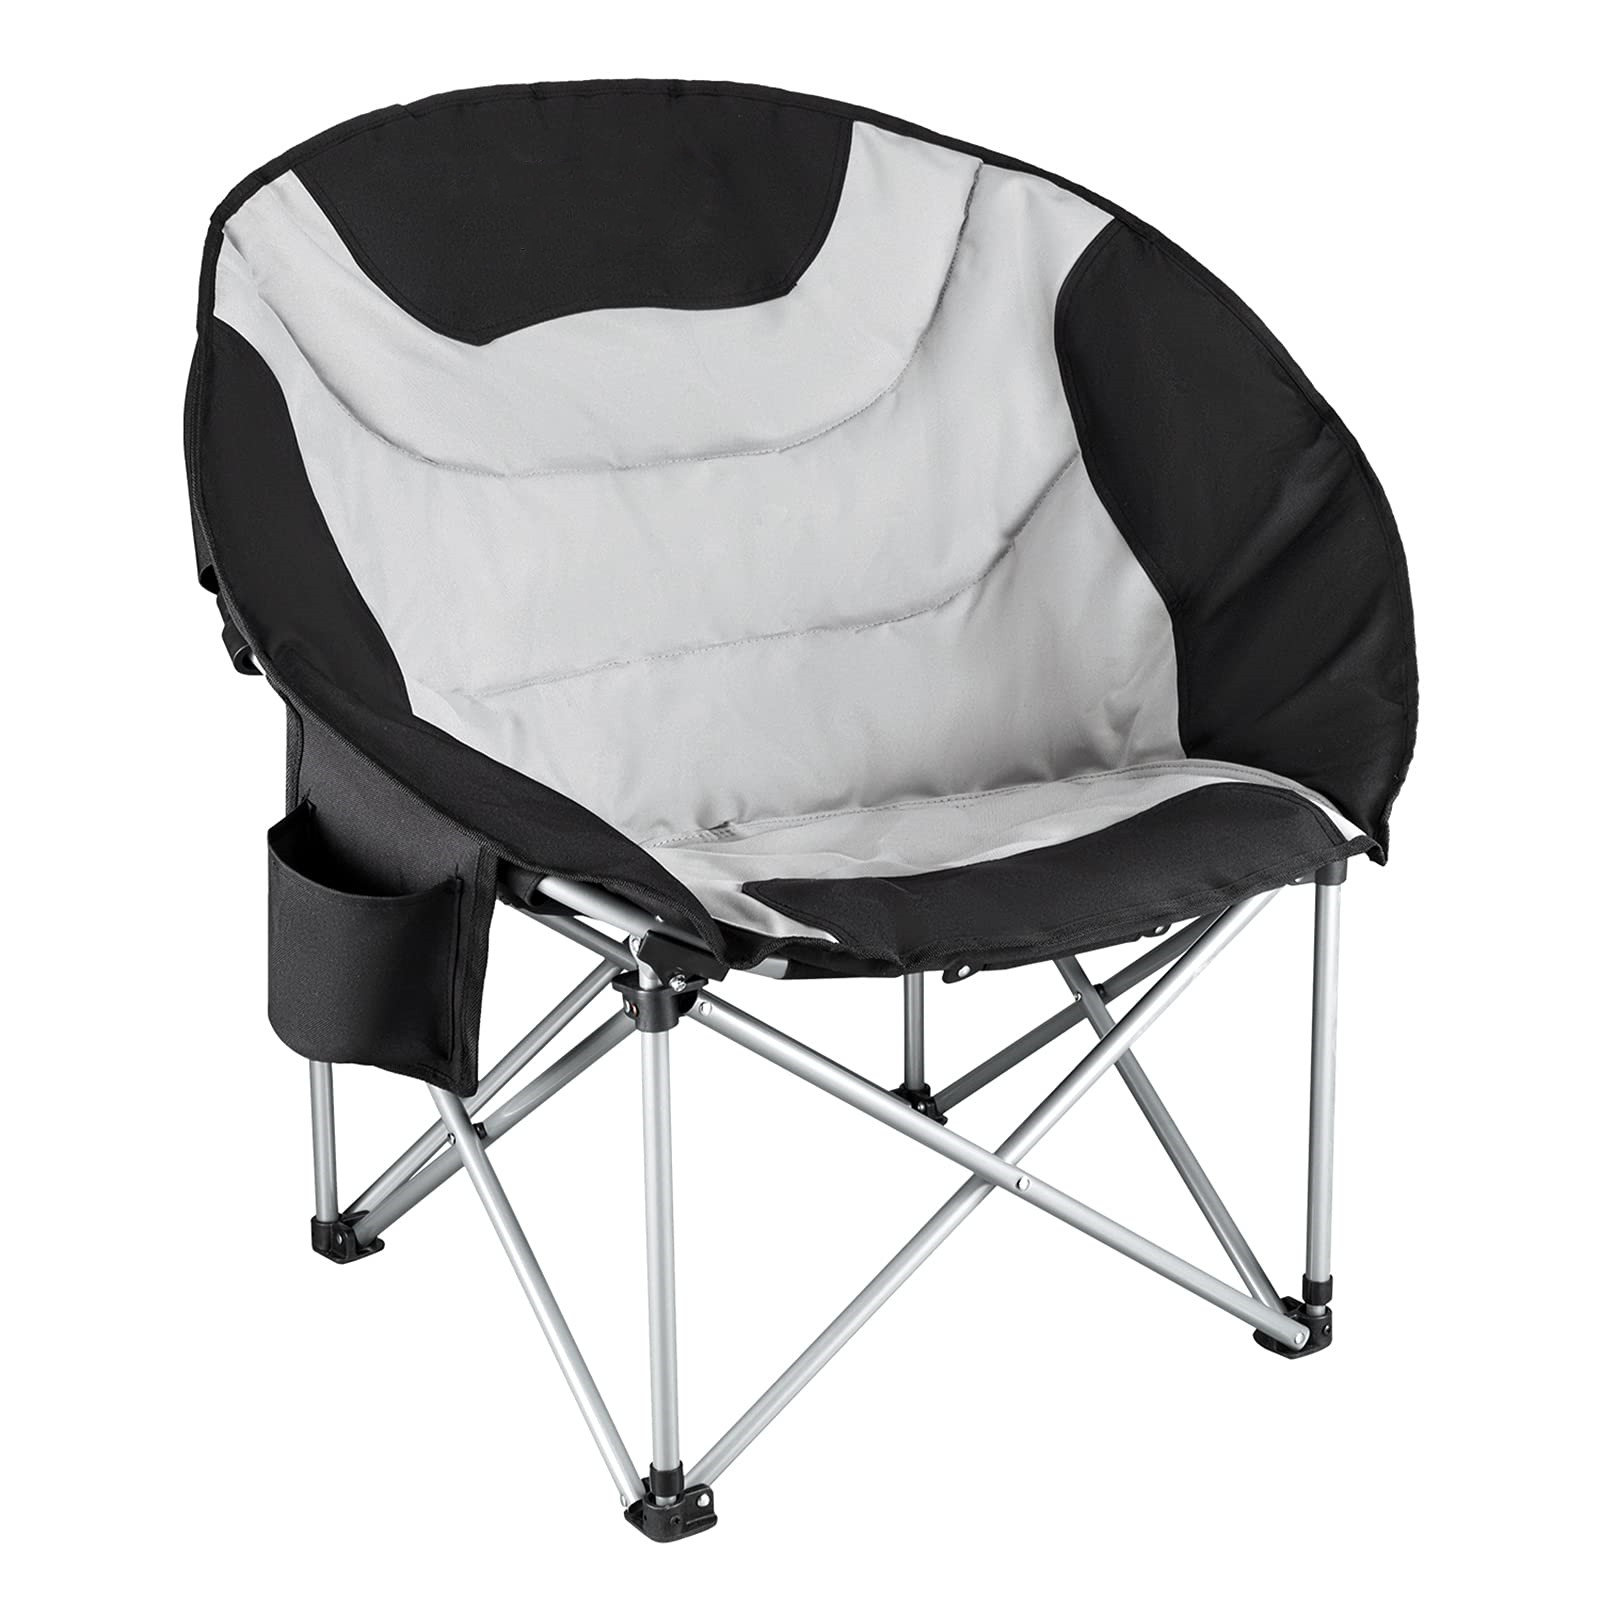 Extra Large Folding Saucer Moon Chair Padded Round Seat Oxford Portable Outdoor 